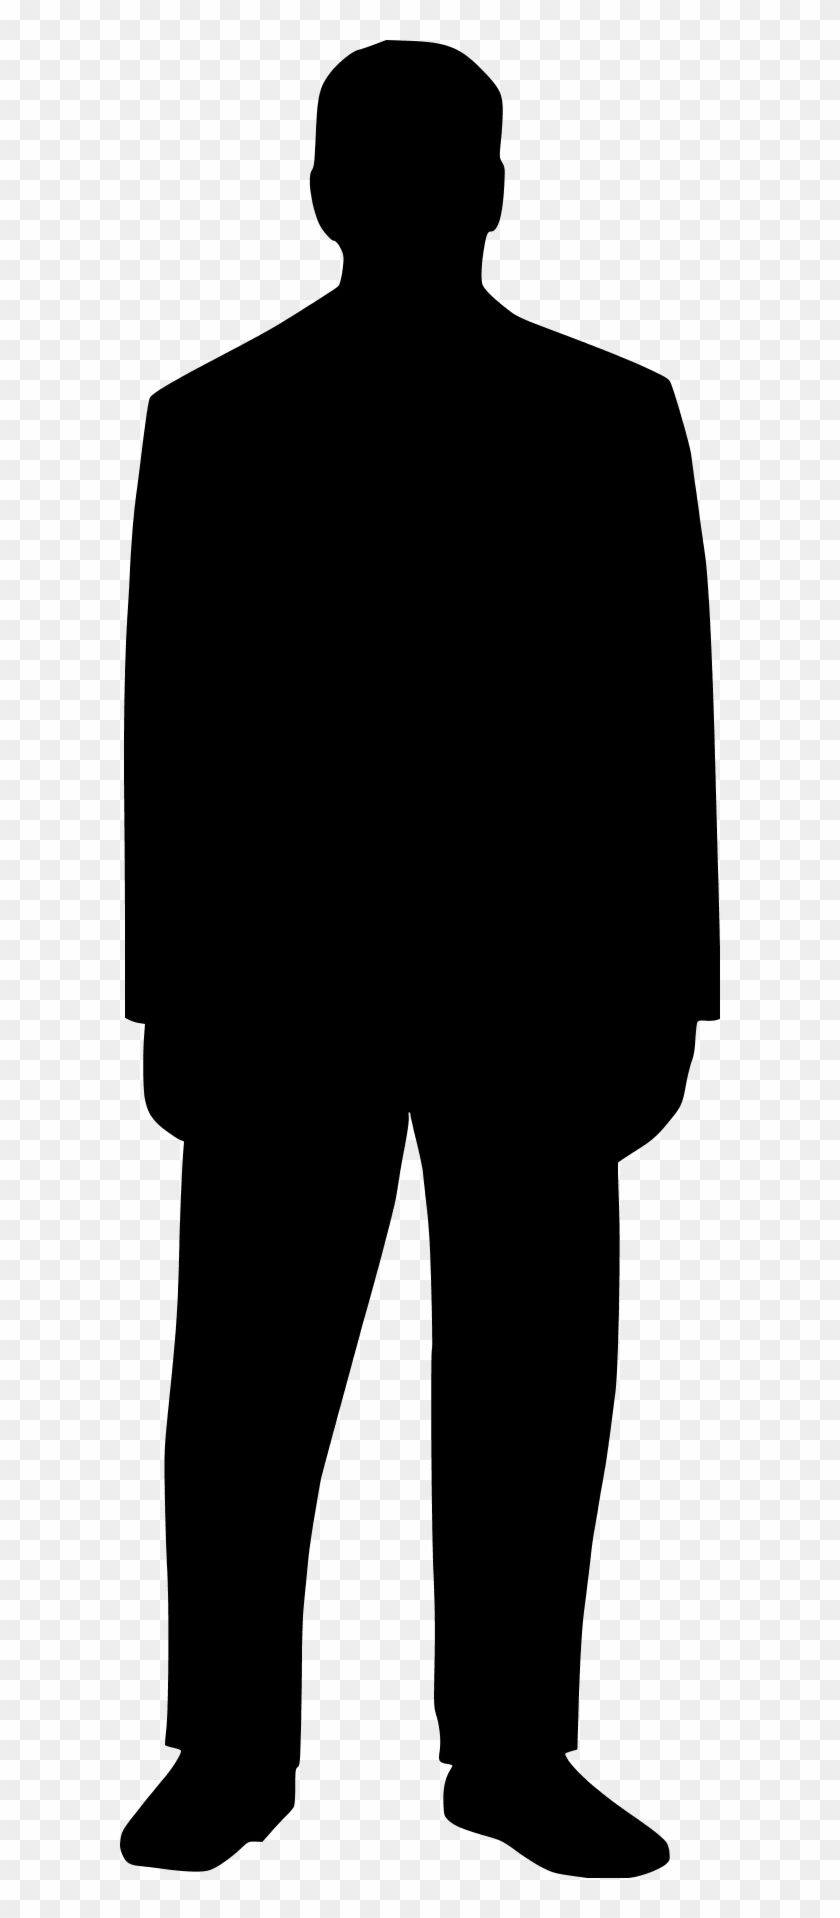 Man Standing Silhouette Clipart Panda - Outline Of A Man Standing ...